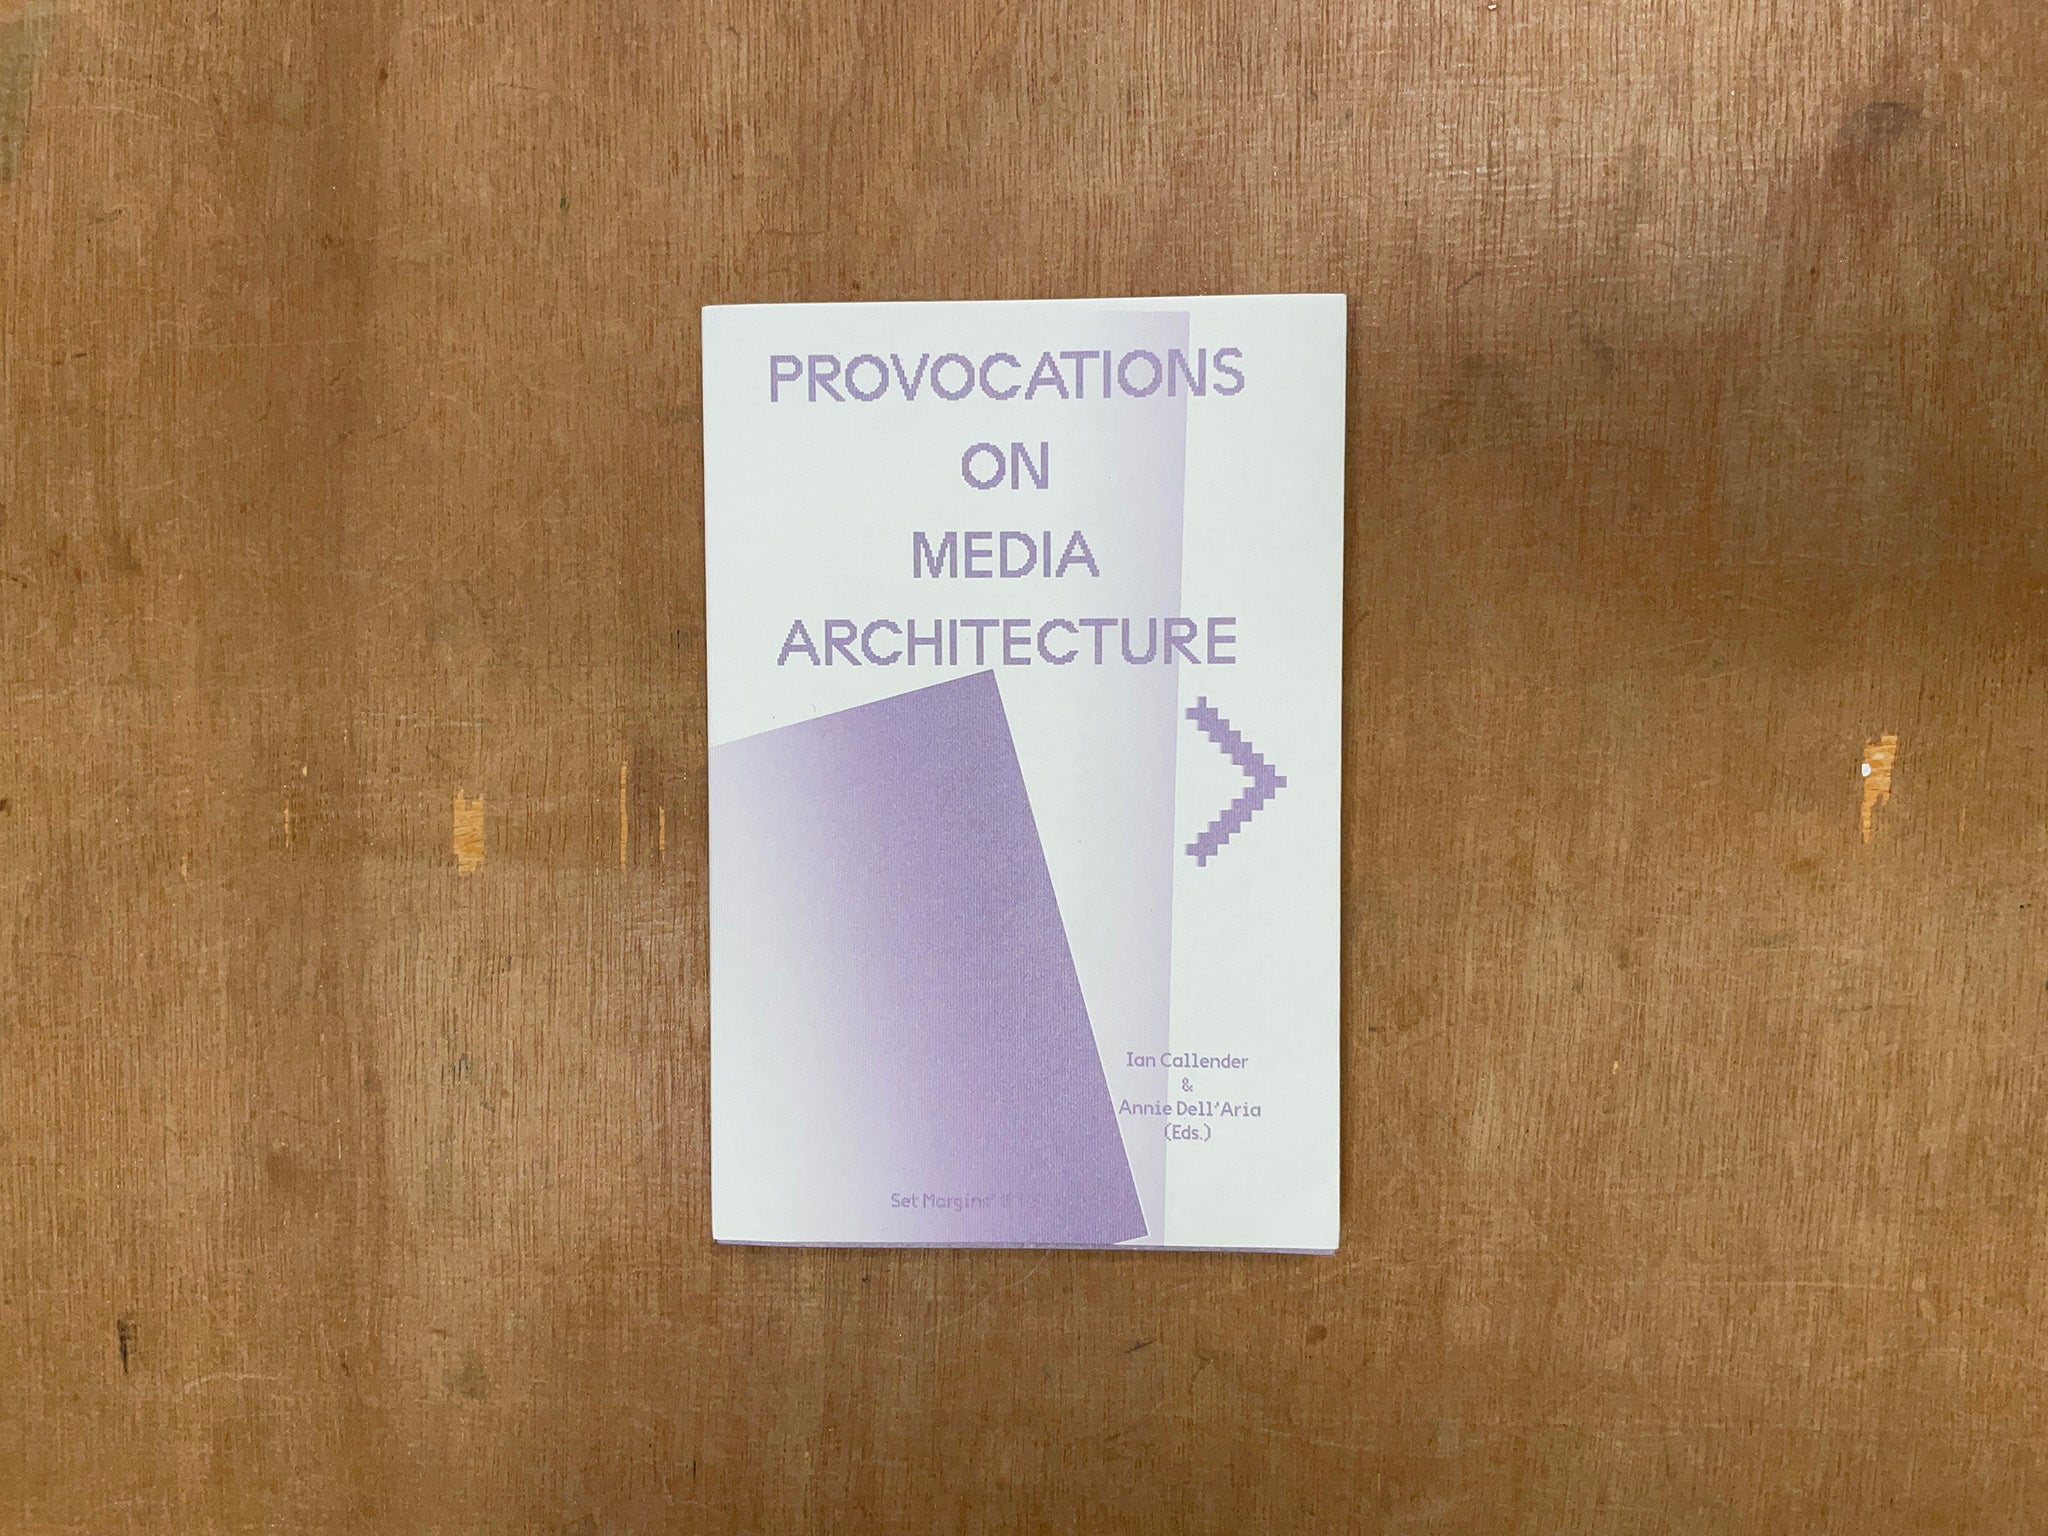 PROVOCATIONS ON MEDIA ARCHITECTURE Ed. by Ian Callender & Annie Dell'Aria